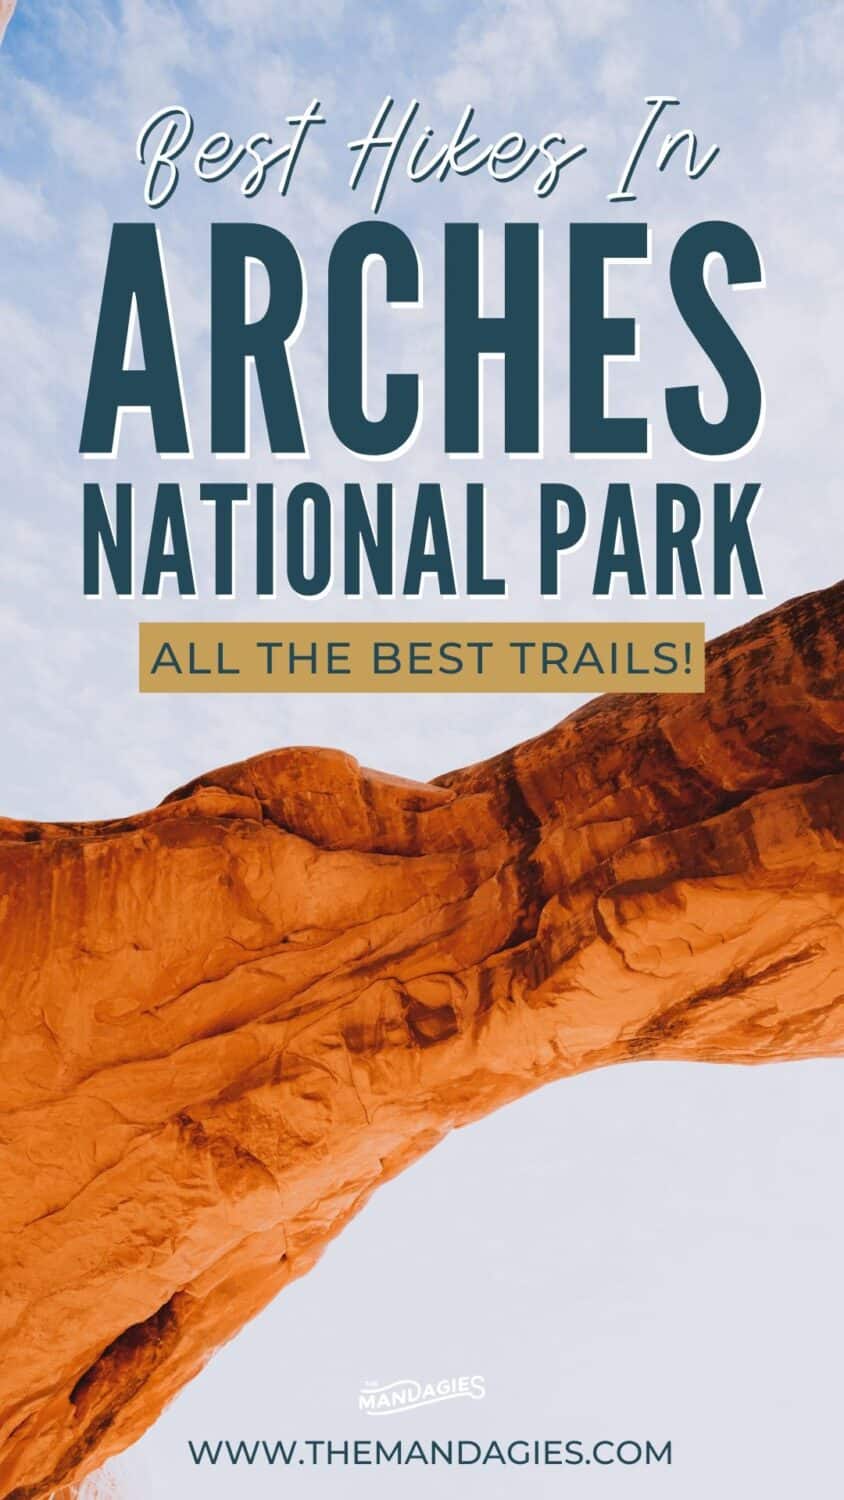 Looking for the best hikes in Arches National Park? Look no further! We're sharing the best hiking trails in Arches, including Delicate Arch, Landscape Arch, Turret Arch. The Windows Loop, Devil's Garden Loop, and so much more! Save this post for your next trip to Moab, Utah! #utah #moab #arches #archesnationalpark #delicatearch #nationalparks #hiking #photography #desert